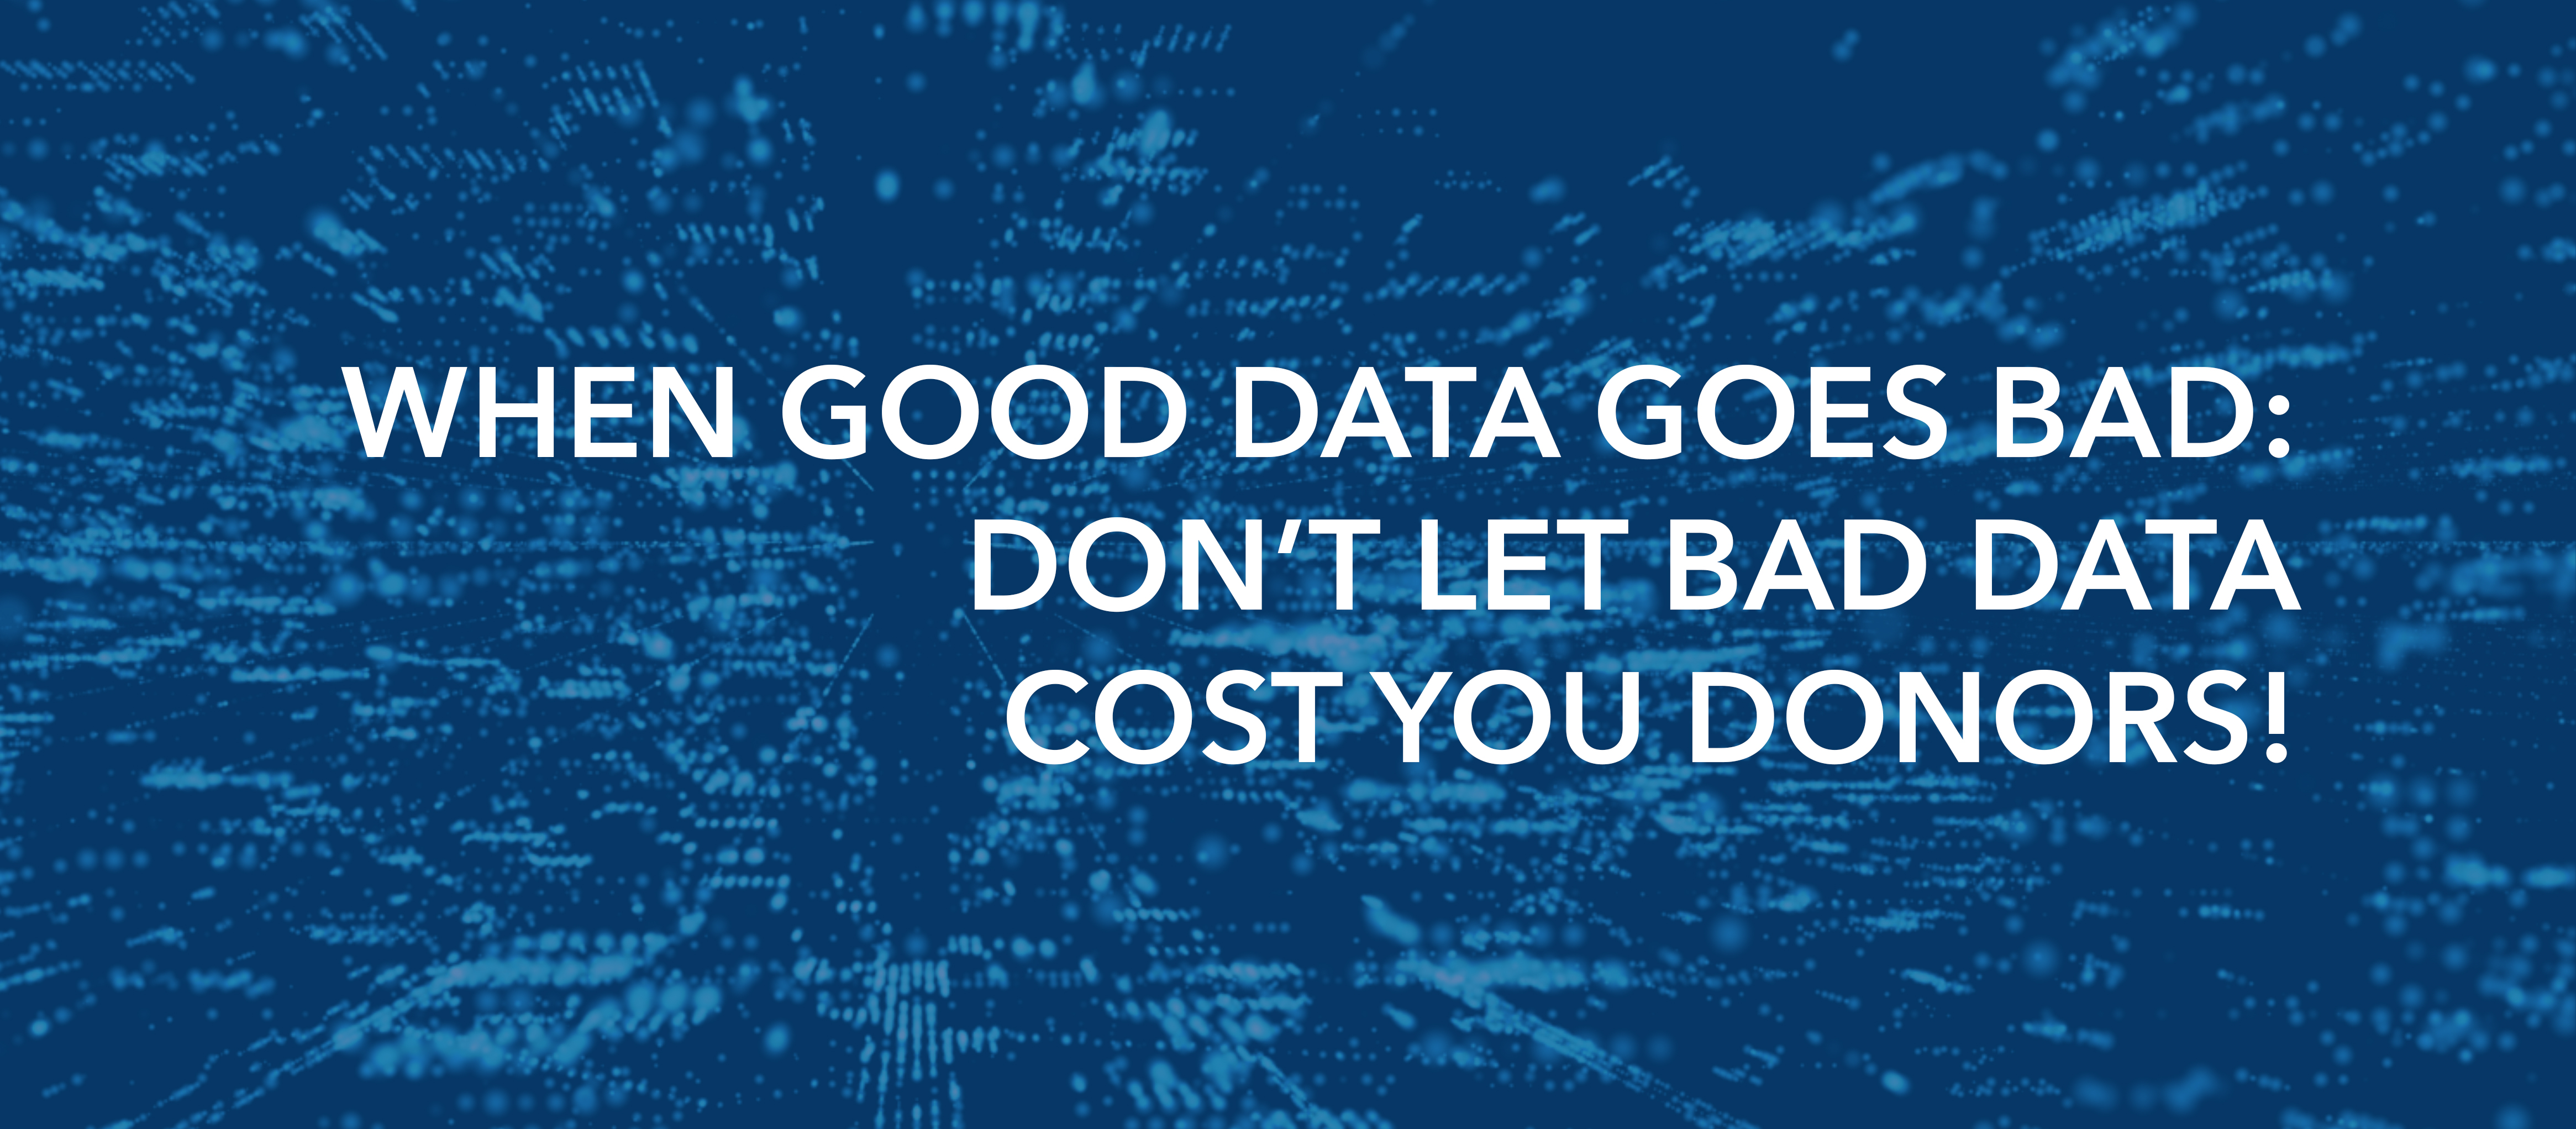 When Good Data Goes Bad: Don’t Let Bad Data Cost You Donors.